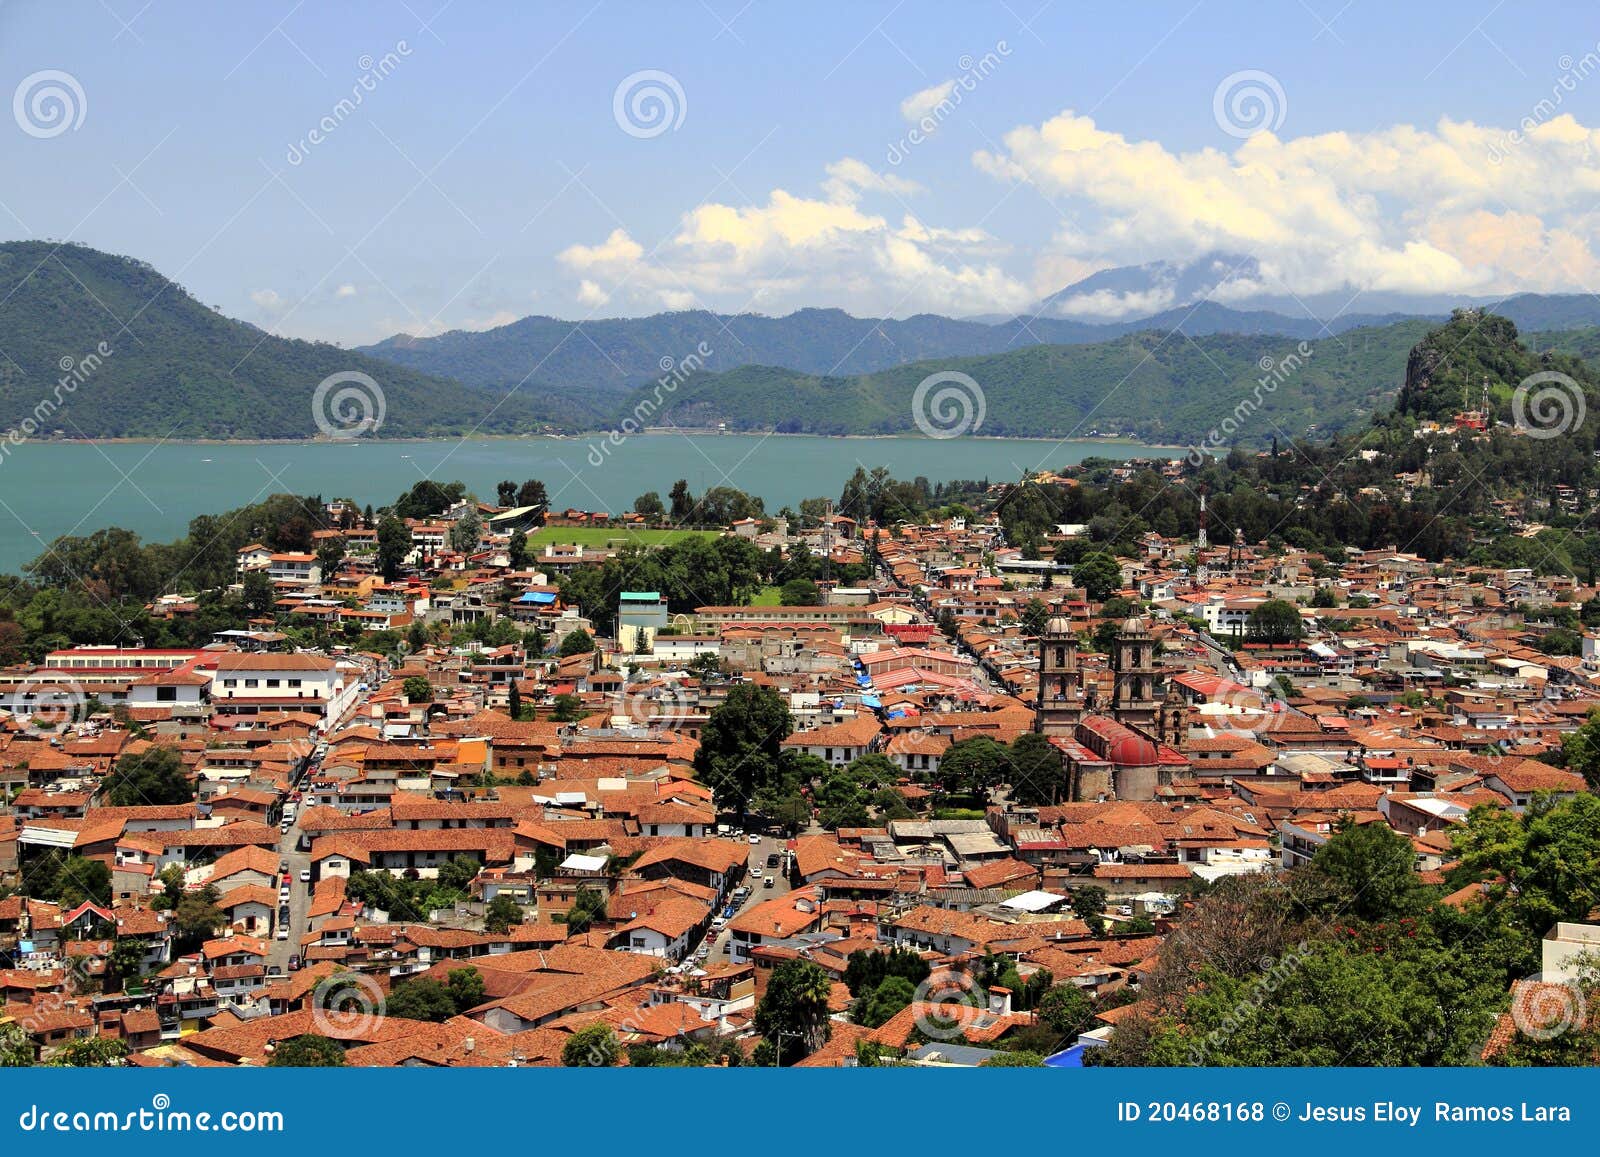 tile roofs of the city of valle de bravo, mexico i